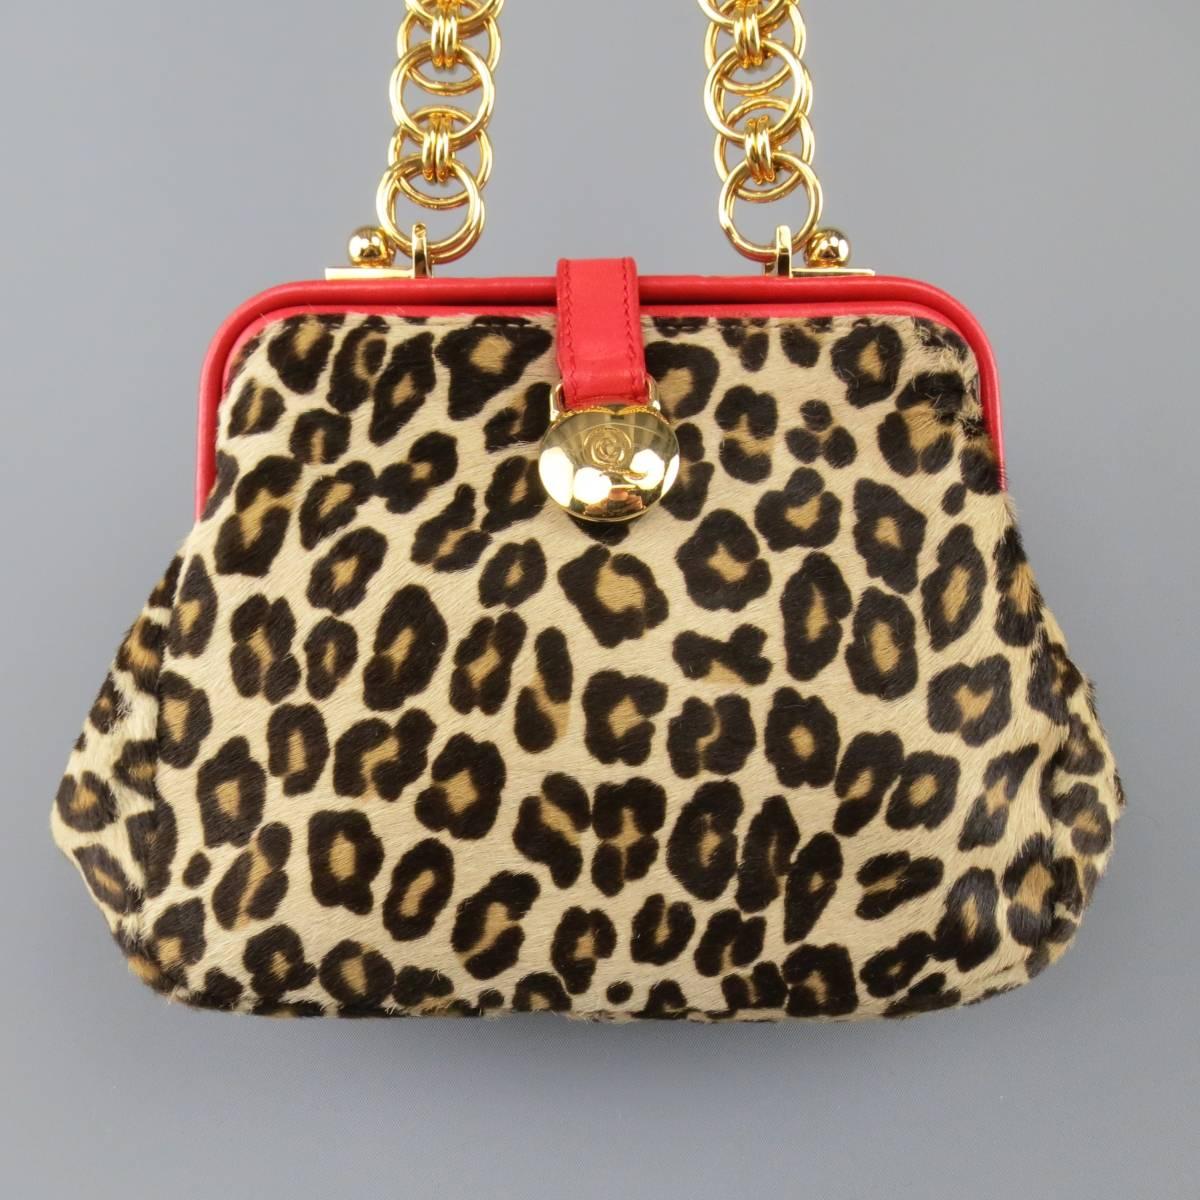 ALEXANDER MCQUEEN purse in a beige cheetah leopard print ponyhair leather features bright red leather details yellow gold tone hoop chain shoulder strap and snap closure. Minor Wear.
 
Good Pre-Owned Condition.
 
Measurements:
 
Length: 9 in.
Width: